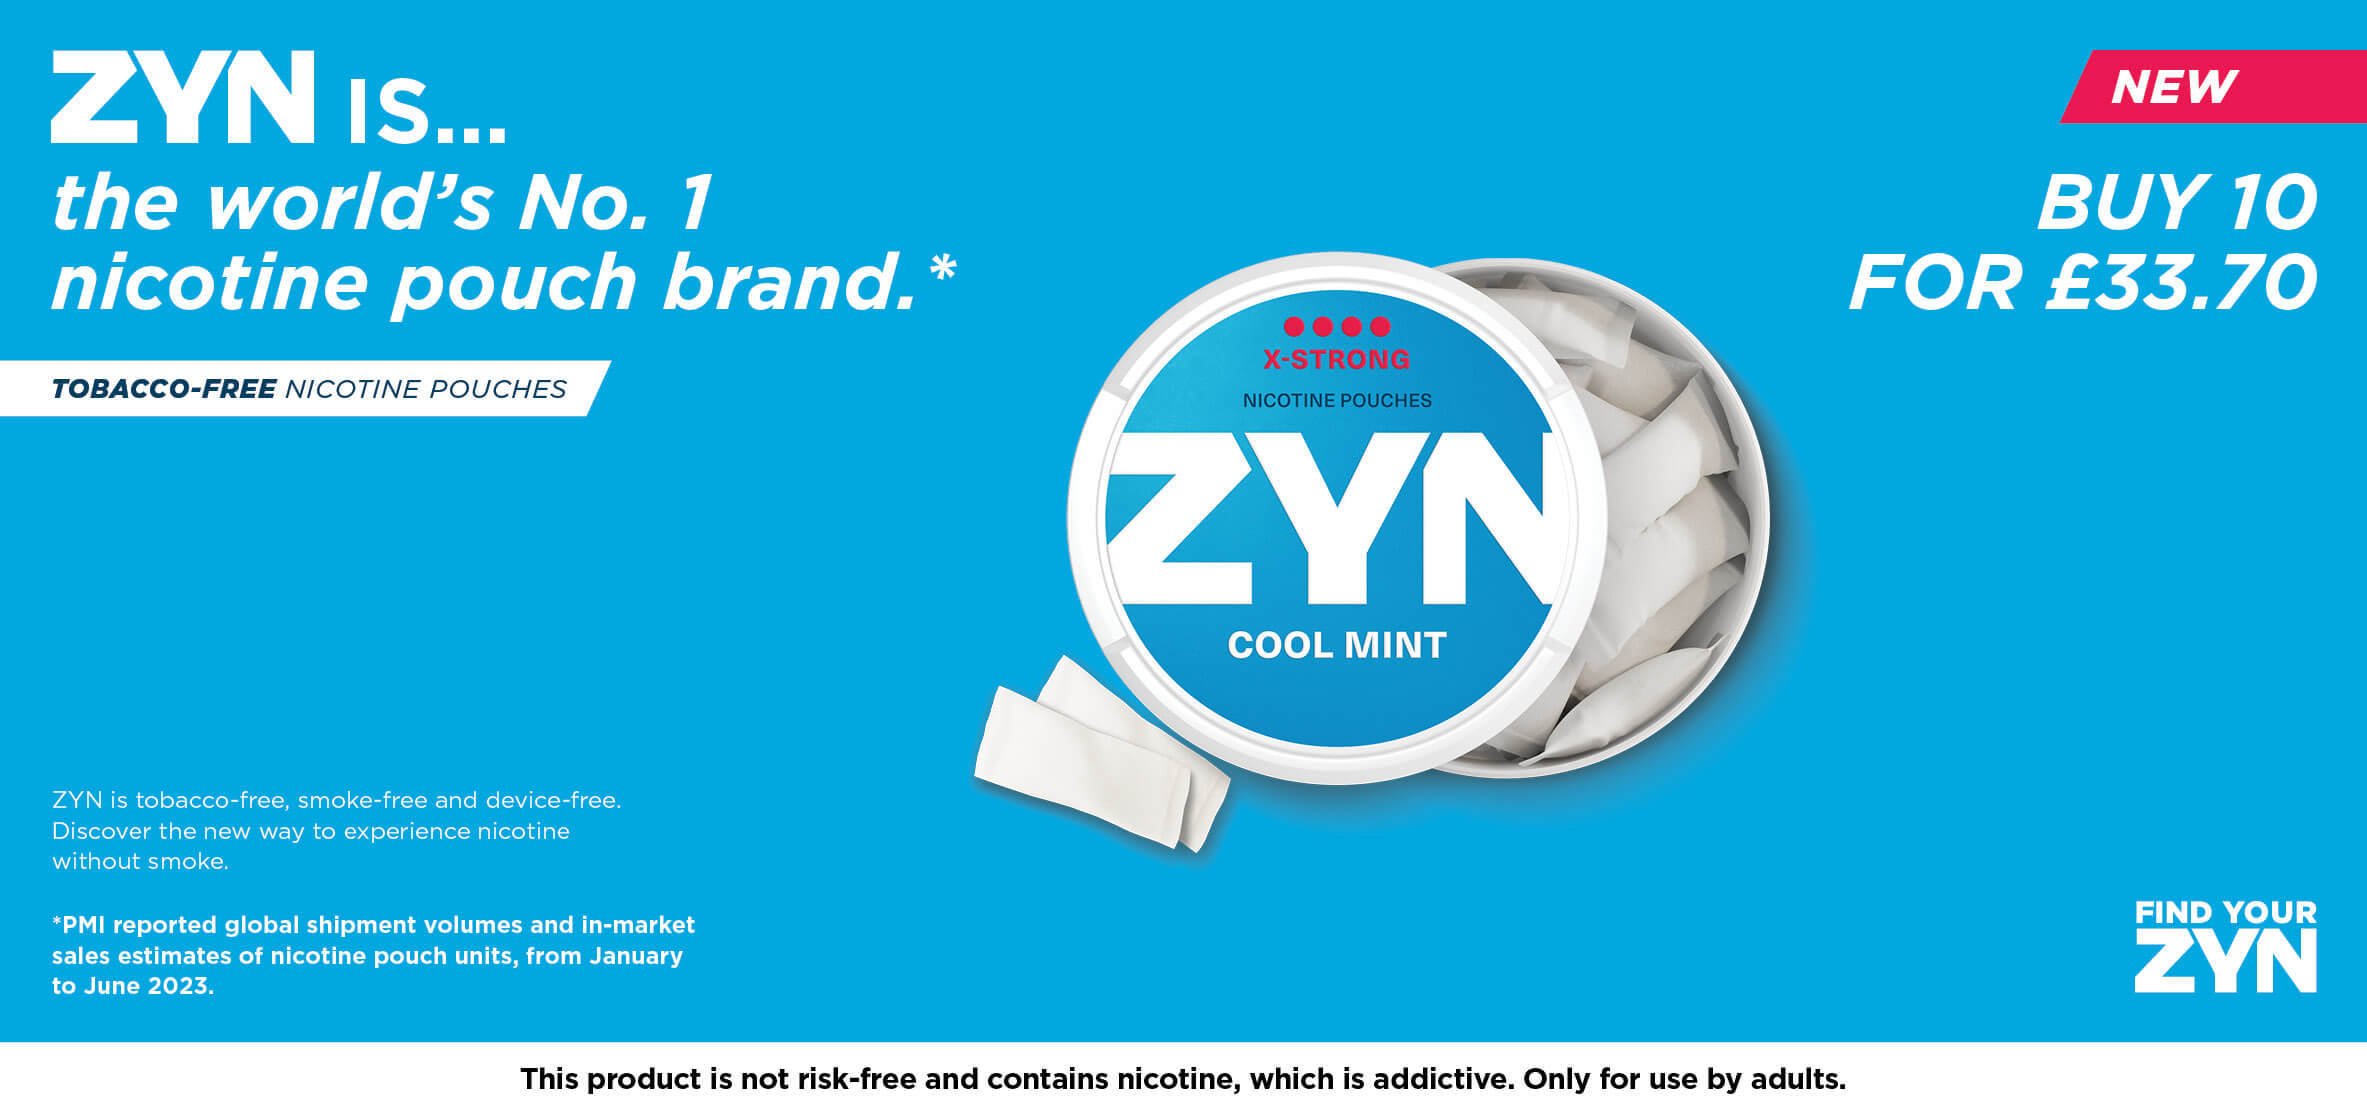 Buy Zyn Gold Medium Mini Nicotine Pouches online at !